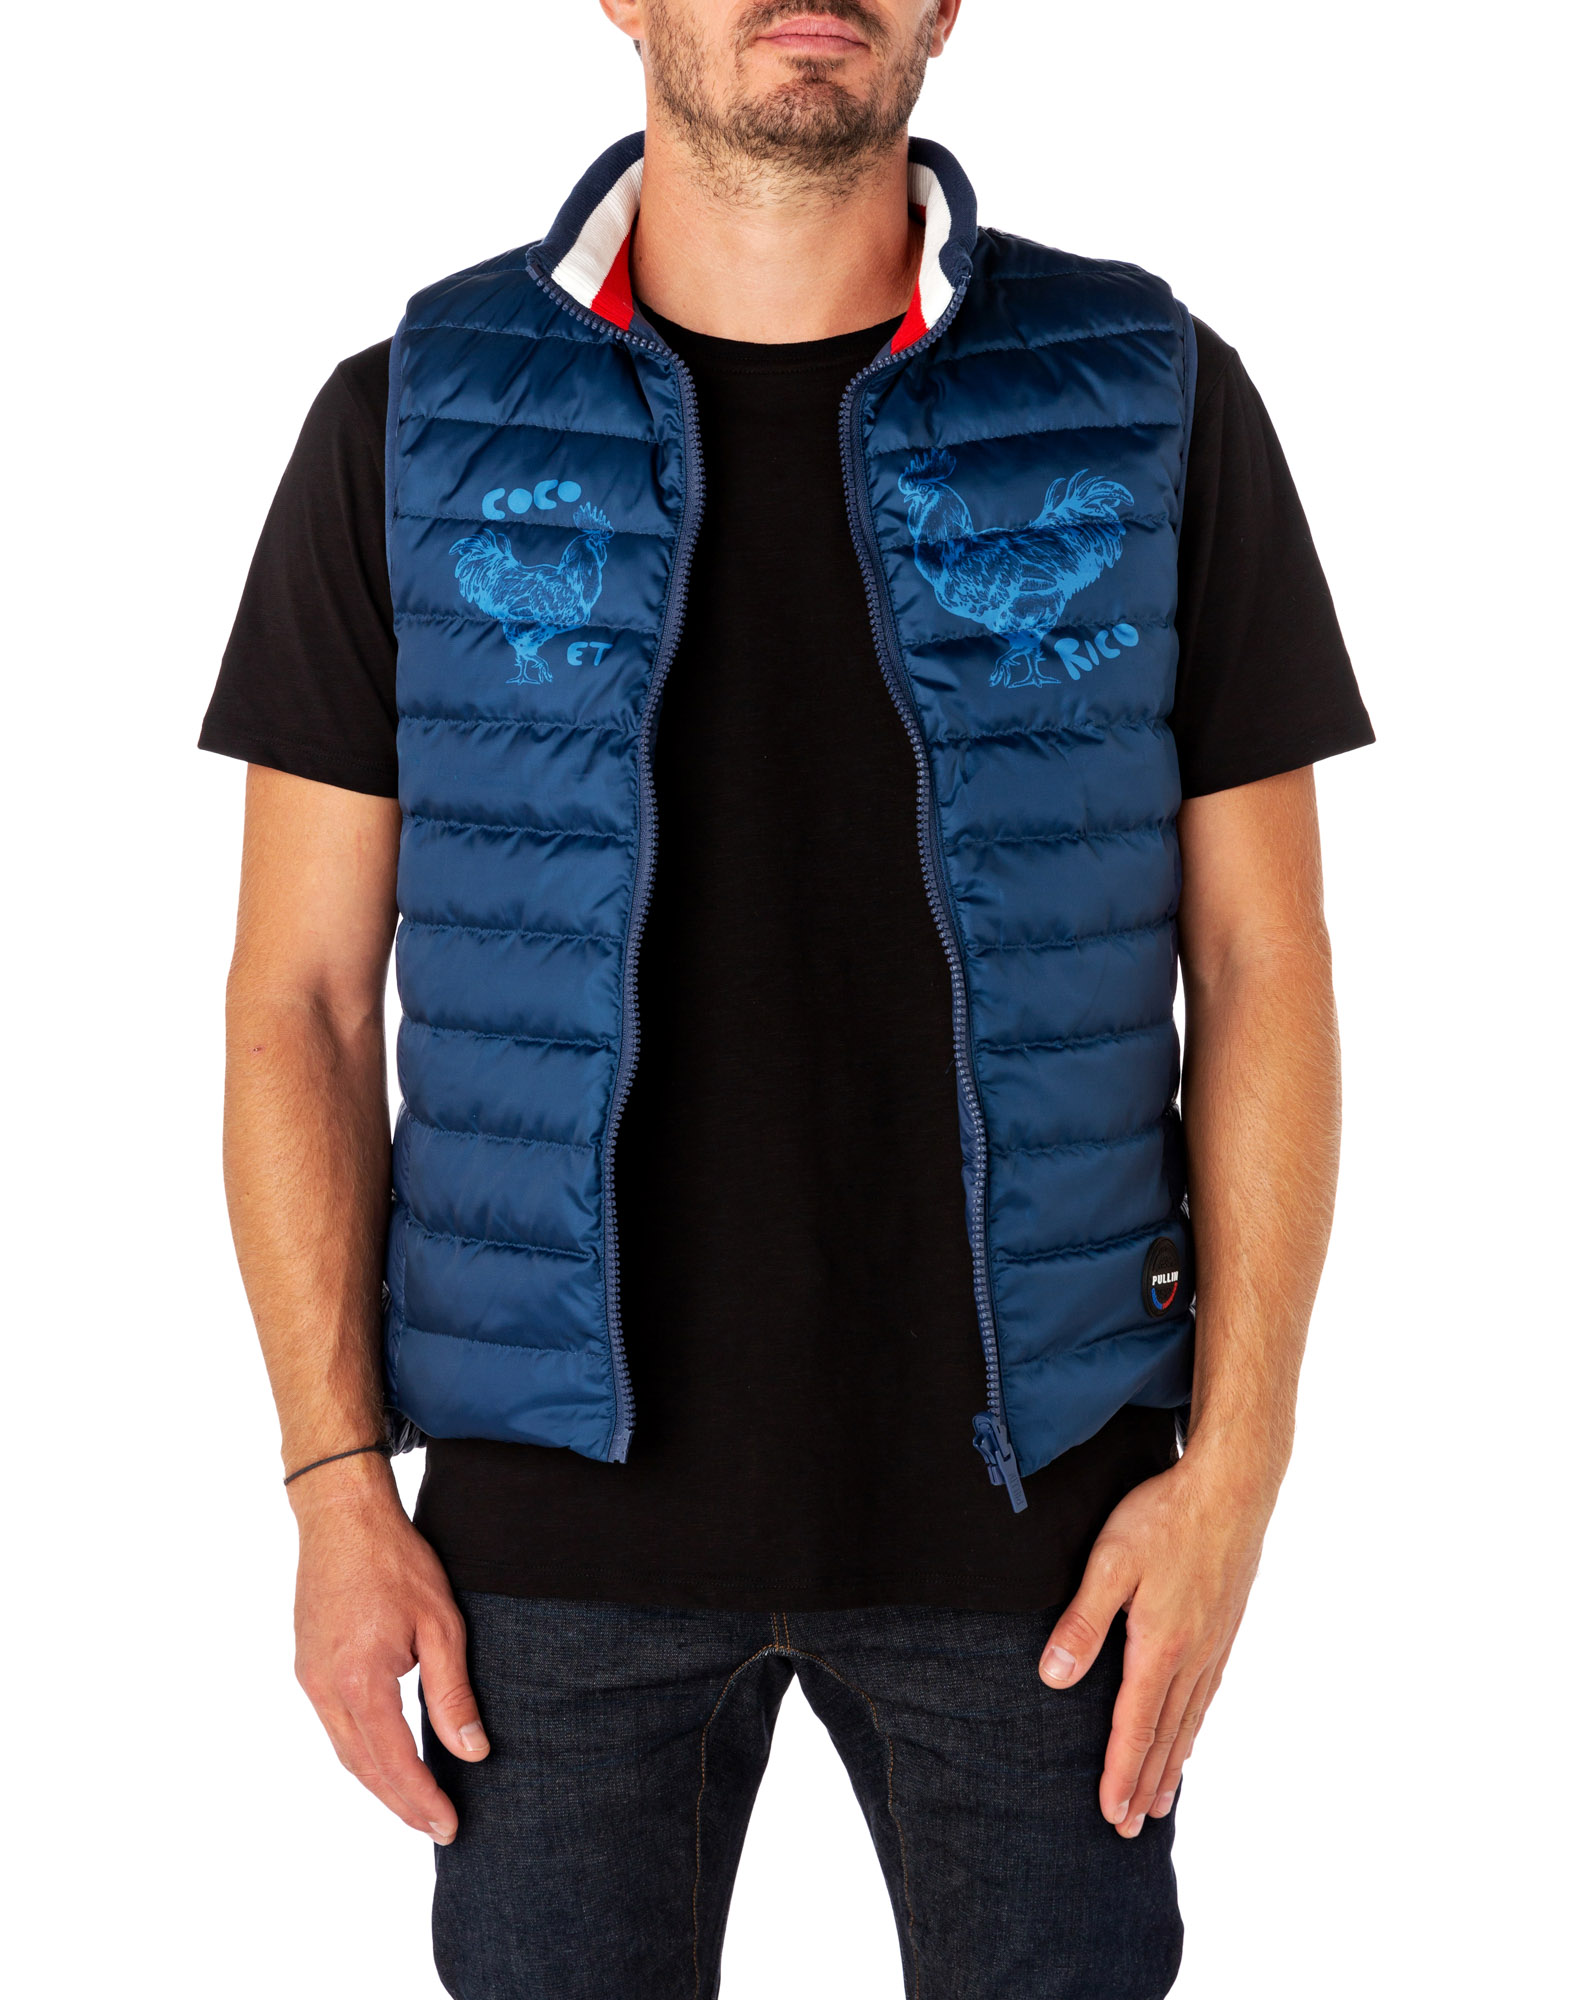 Men's feather jacket without sleeves COCO